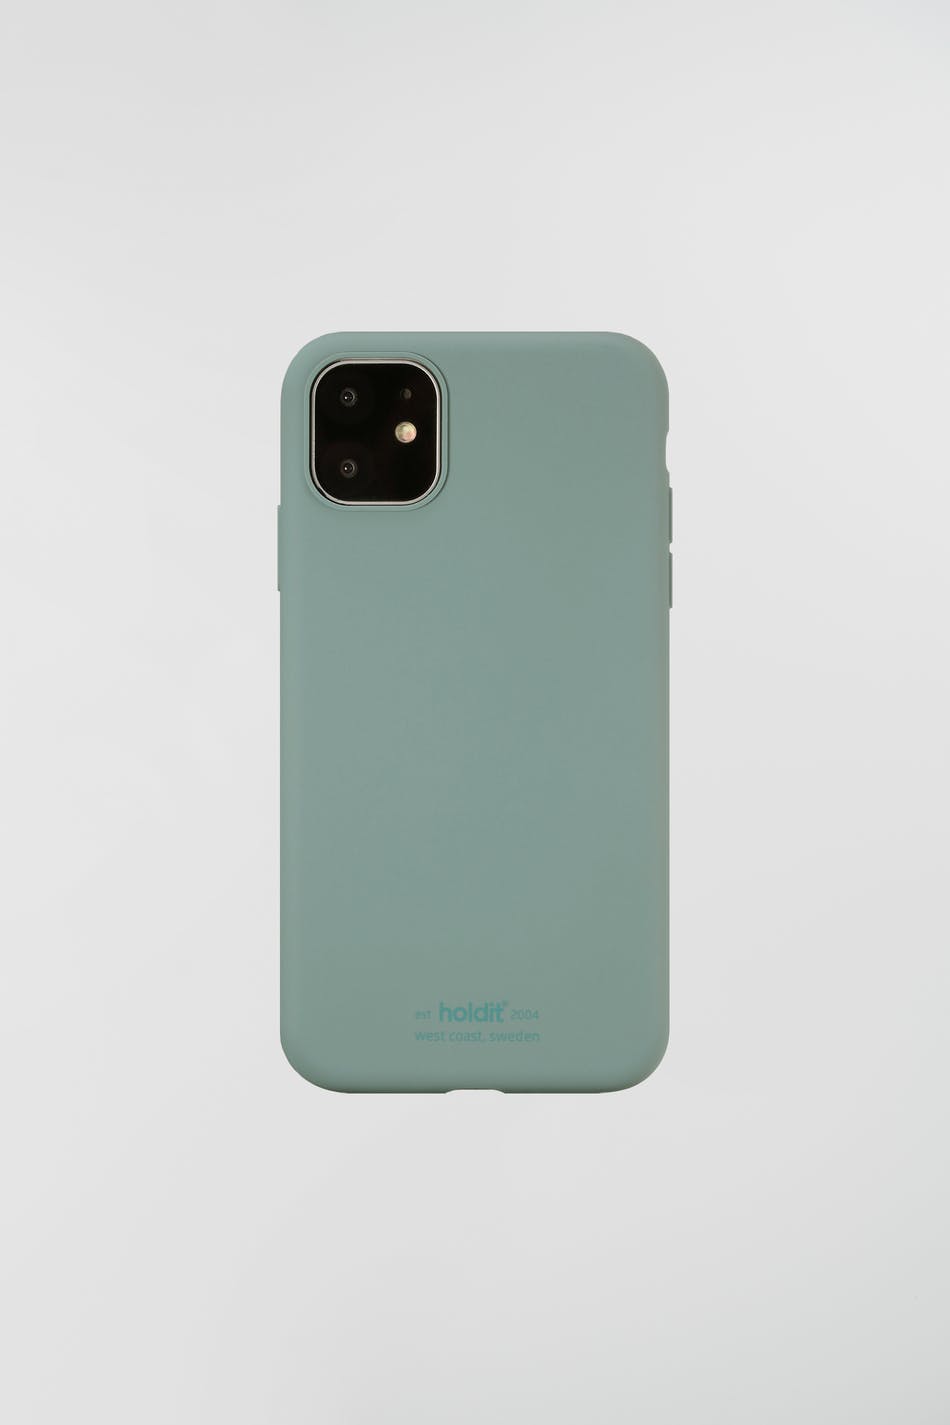 Holdit iphone 11 silicone case